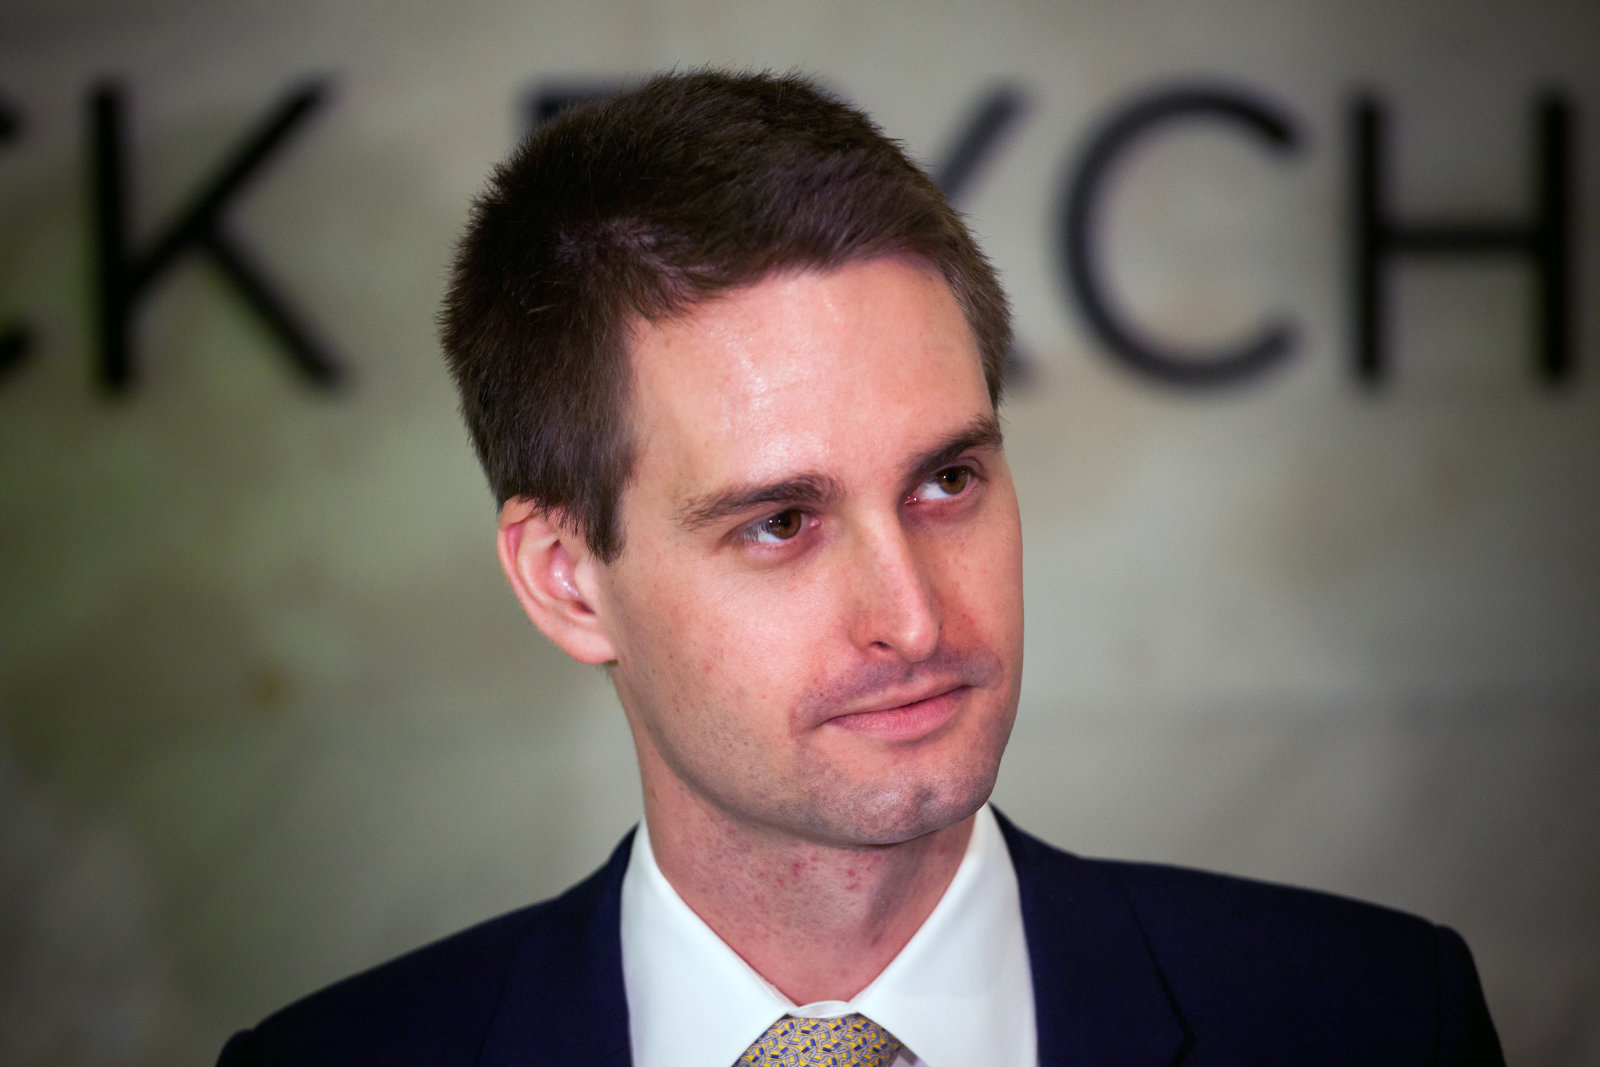 Snapchat CEO throws shade at Facebook's poor data practices